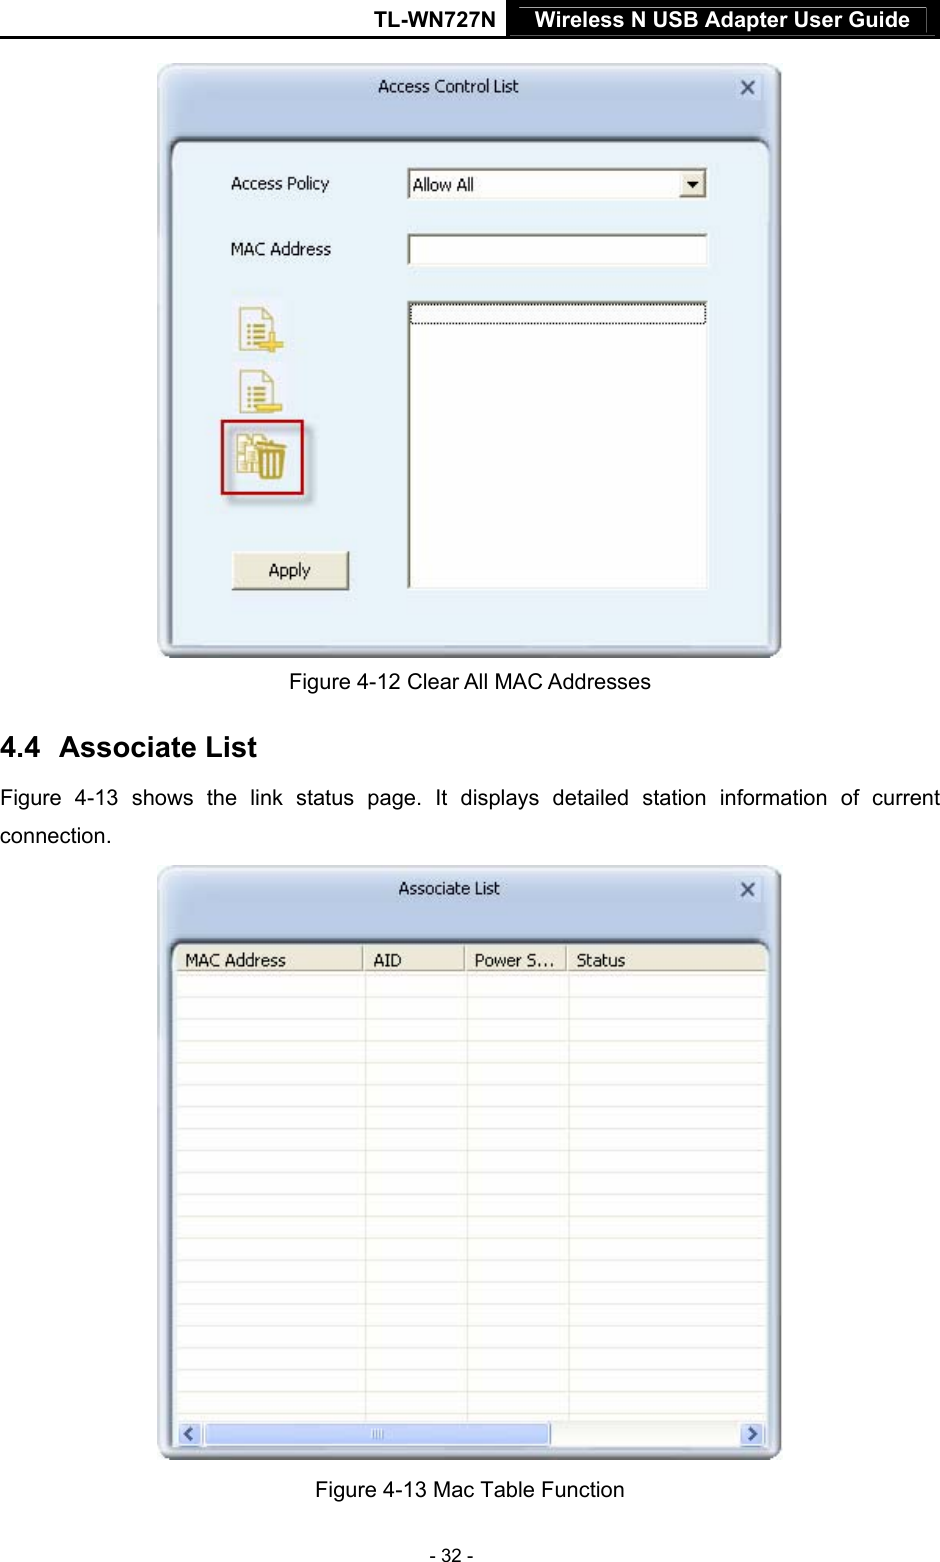 TL-WN727N Wireless N USB Adapter User Guide  - 32 -  Figure 4-12 Clear All MAC Addresses 4.4  19BAssociate List XFigure 4-13X shows the link status page. It displays detailed station information of current connection.  Figure 4-13 Mac Table Function 